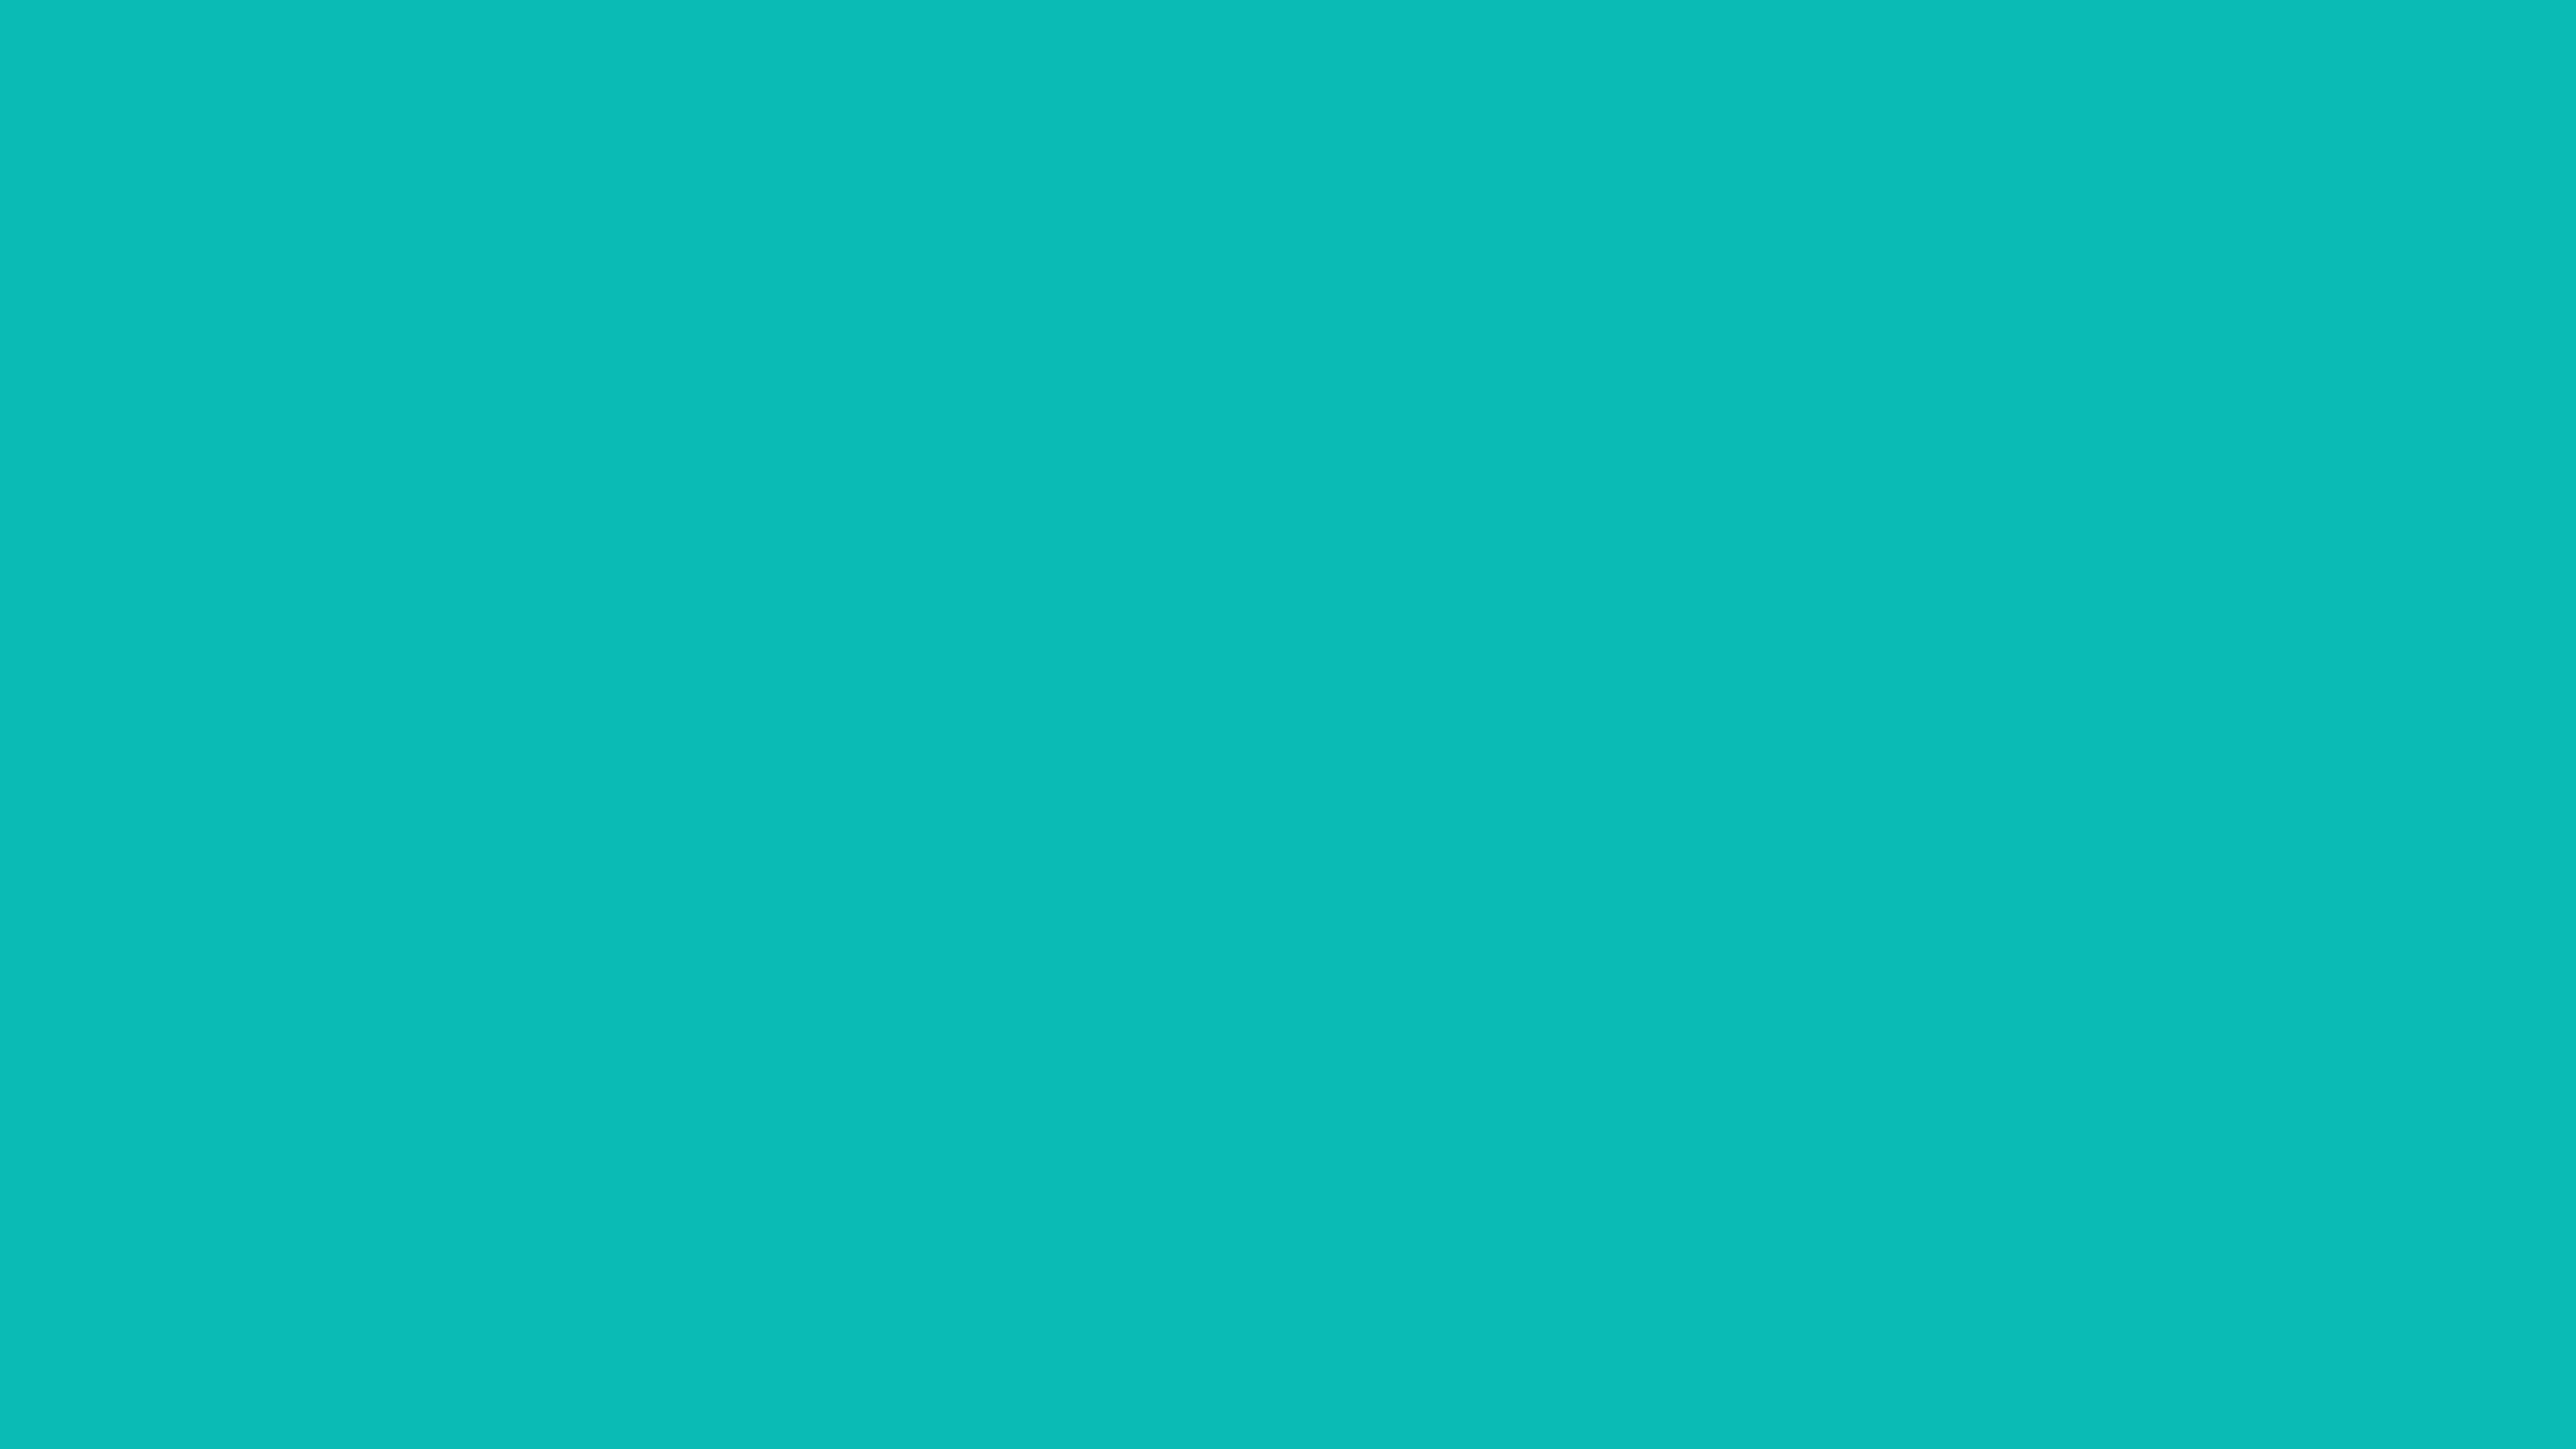 5120x2880 Tiffany Blue Solid Color Background